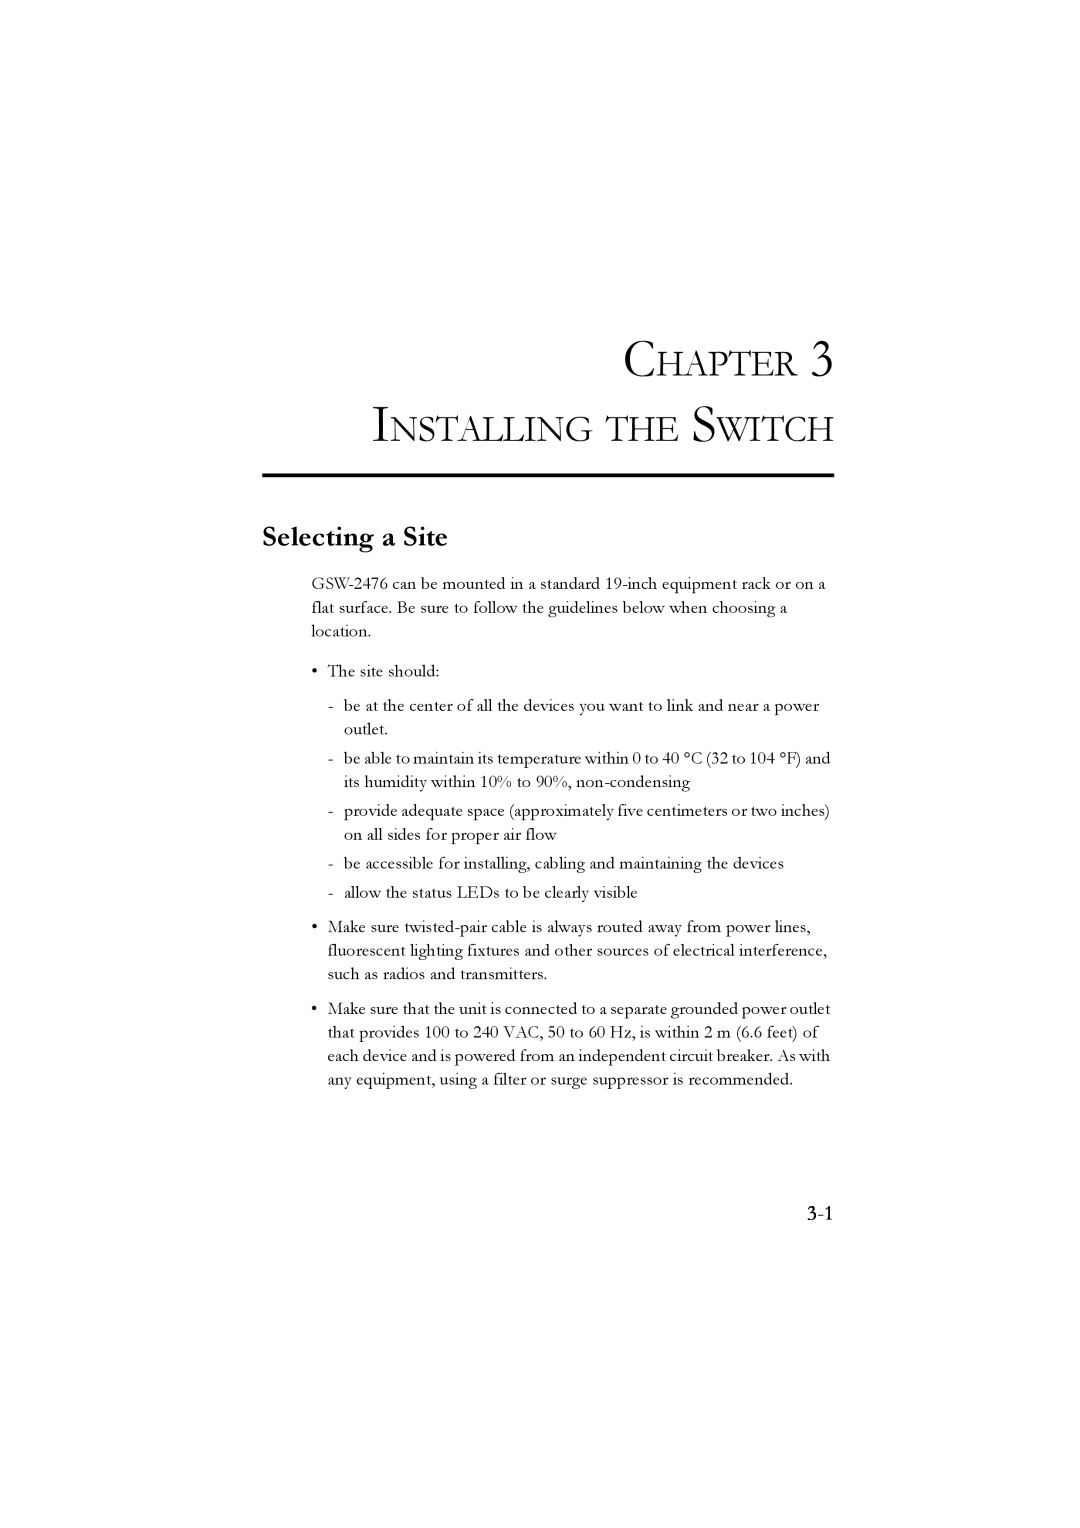 LevelOne GSW-2476 user manual Selecting a Site, Installing The Switch 